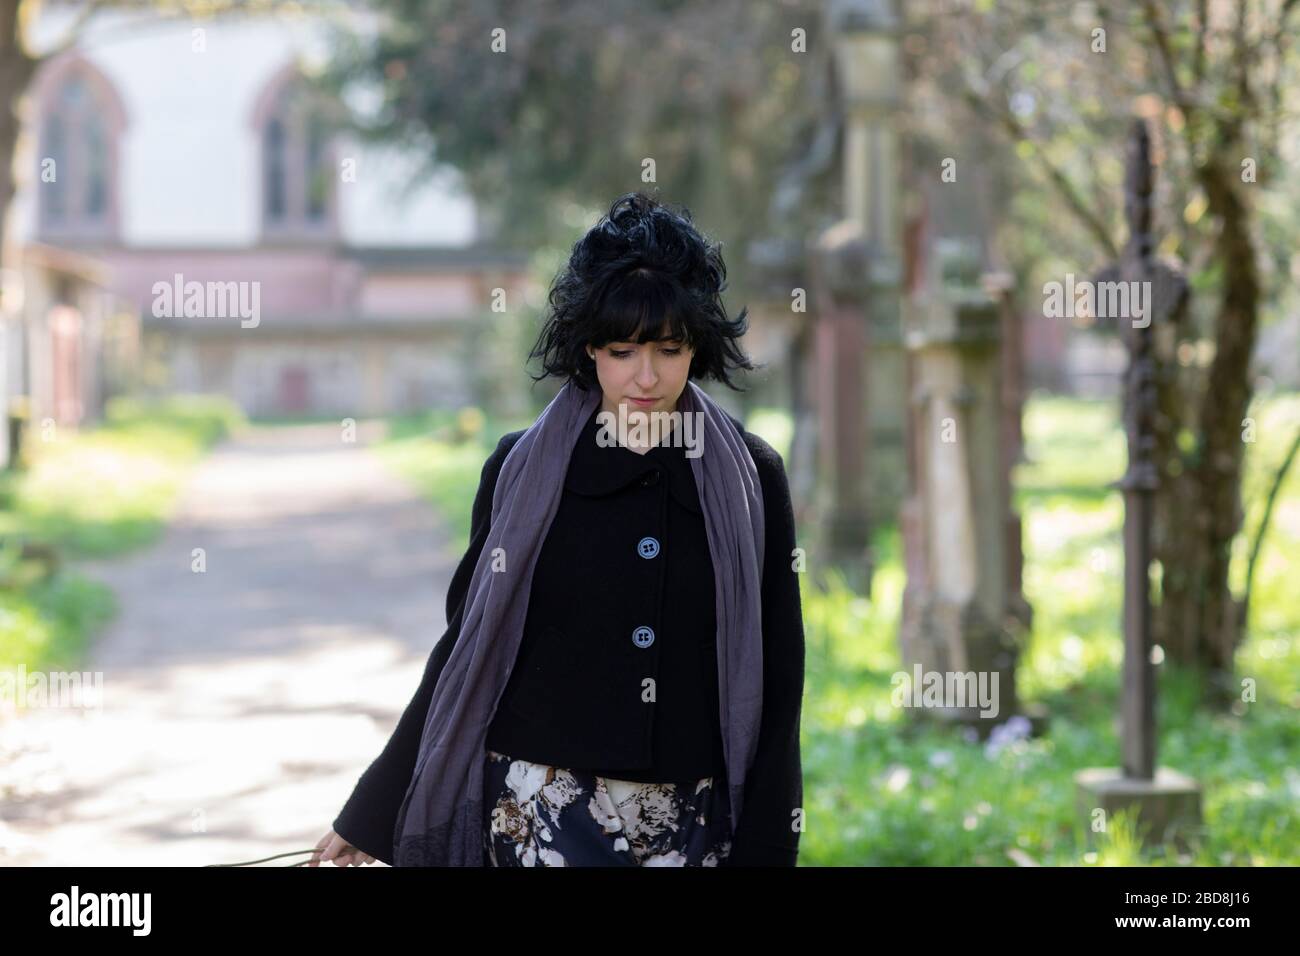 a woman in grief in a graveyard Stock Photo